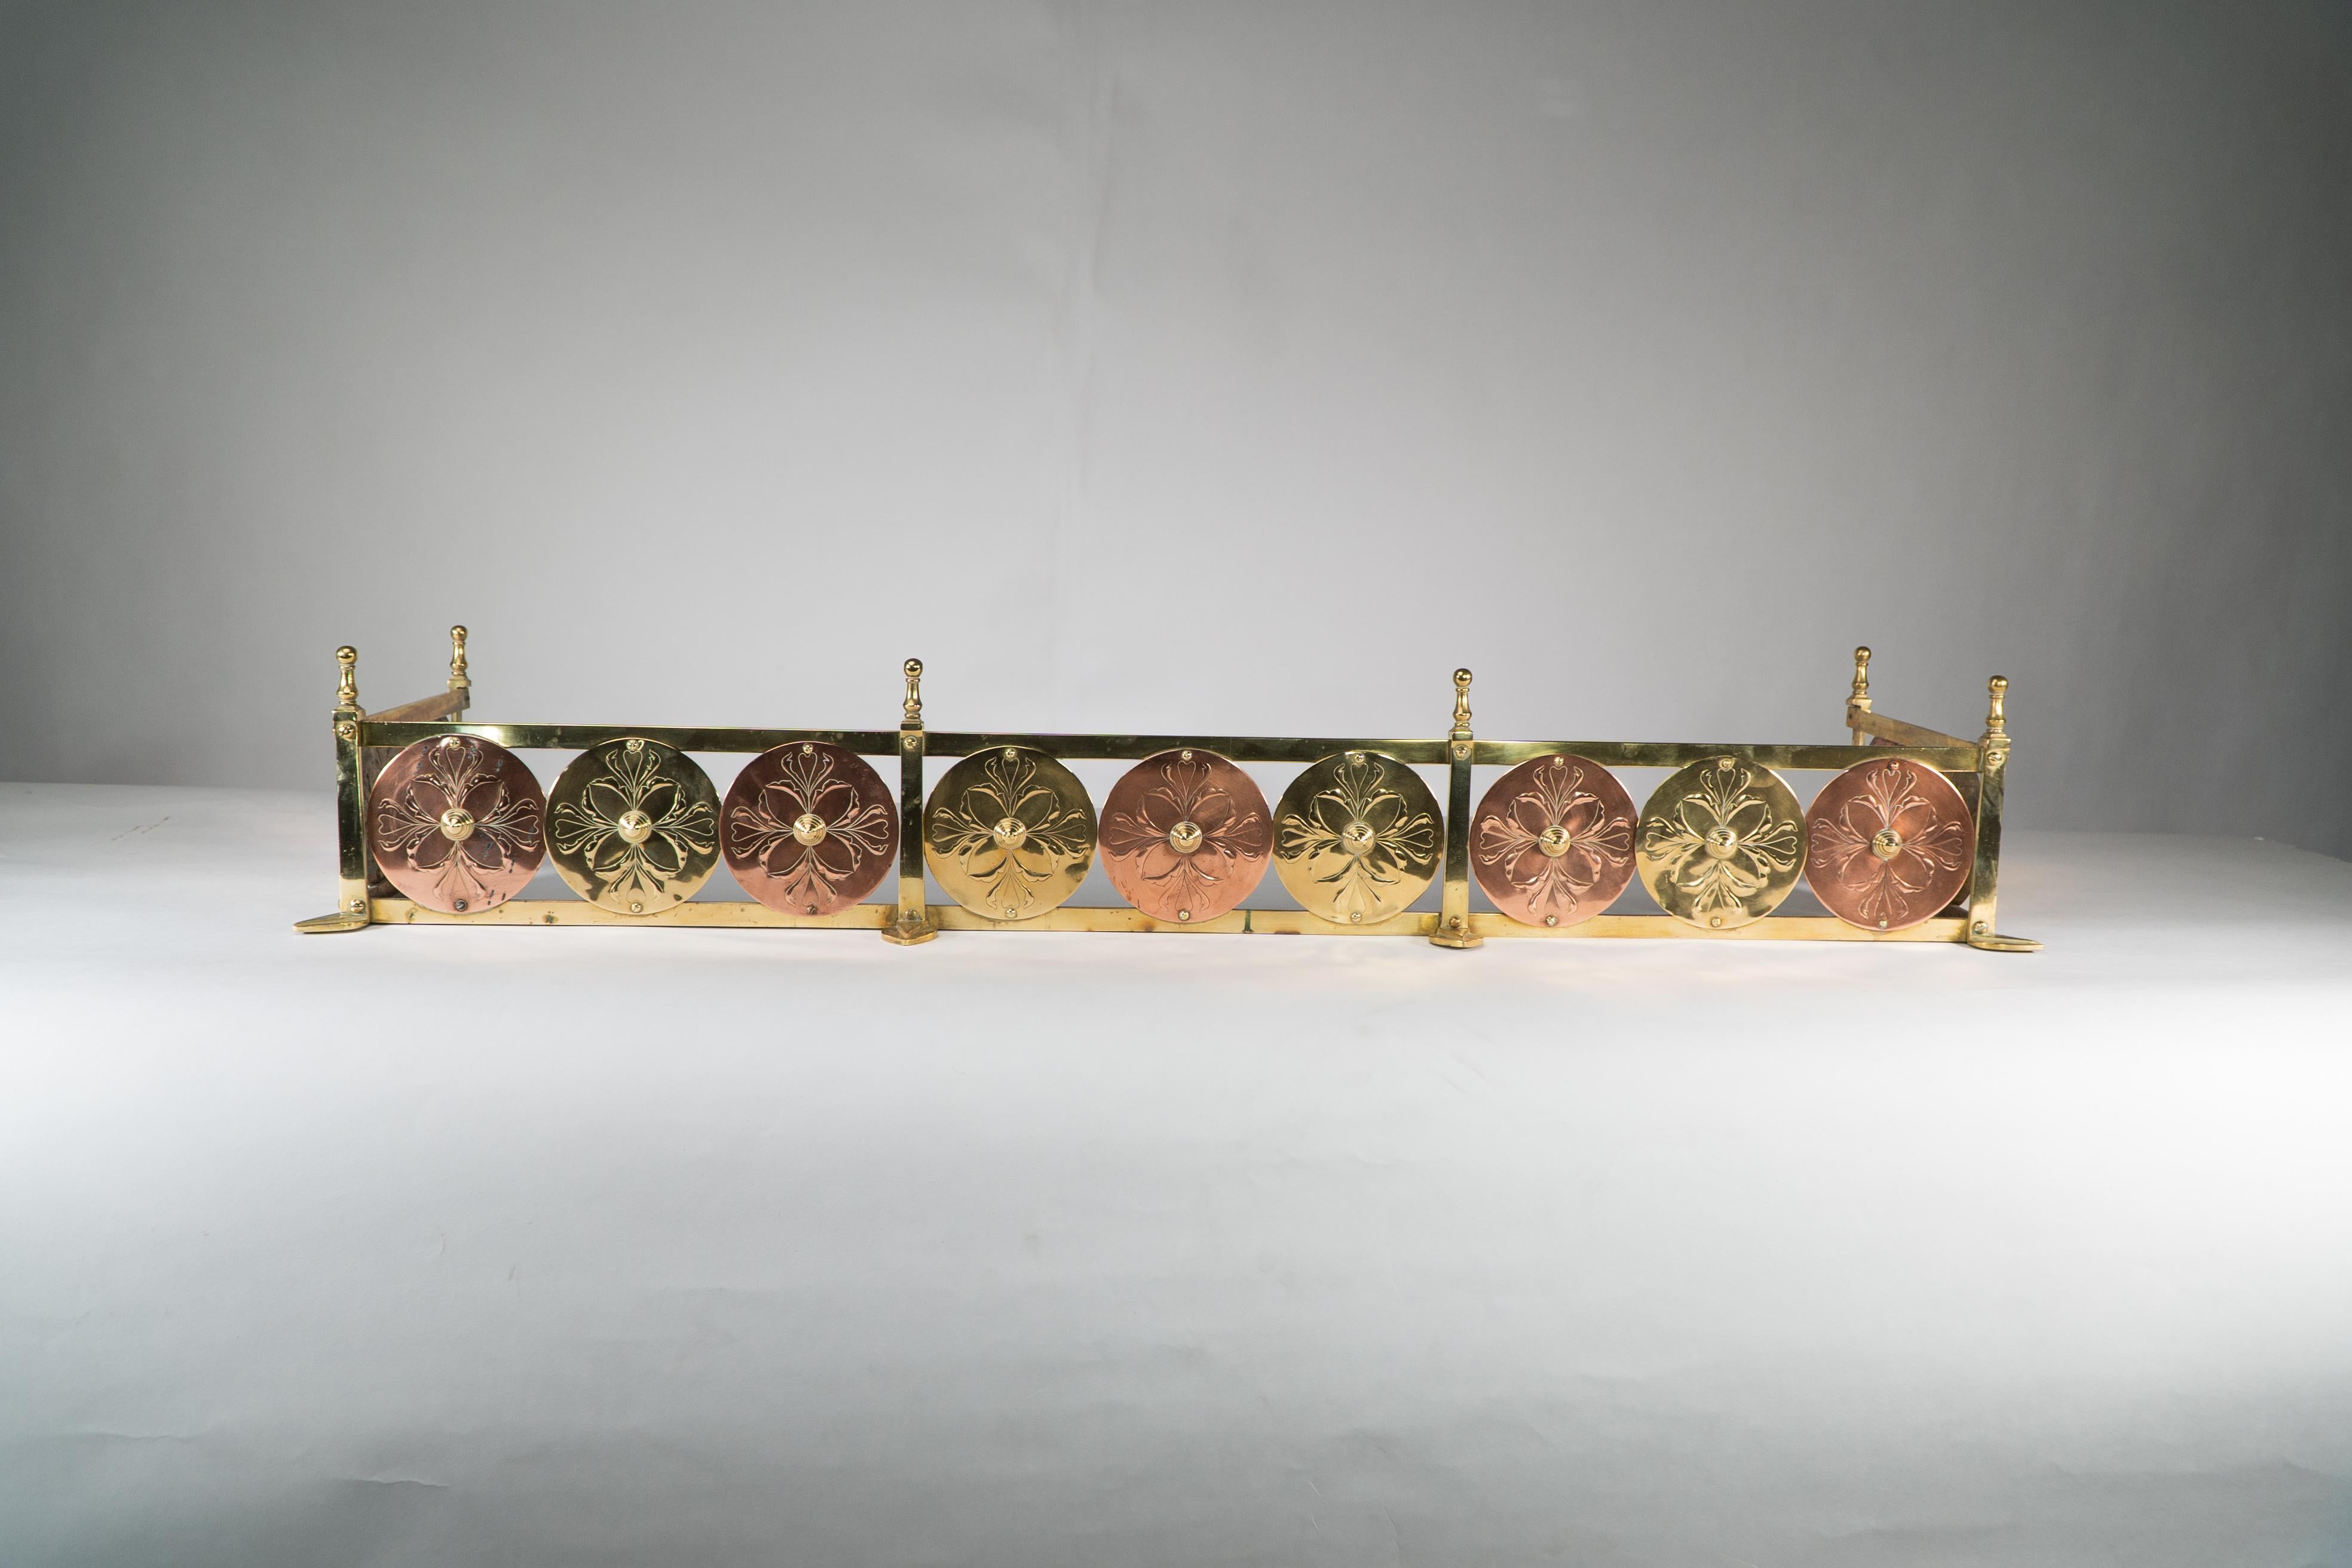 William Arthur Smith Benson and Heywood Sumner. A rare and probably unique Arts & Crafts brass and copper fireplace fender surmounted with six finials and six leaf-shaped feet. The main body with alternating brass and copper discs, each with